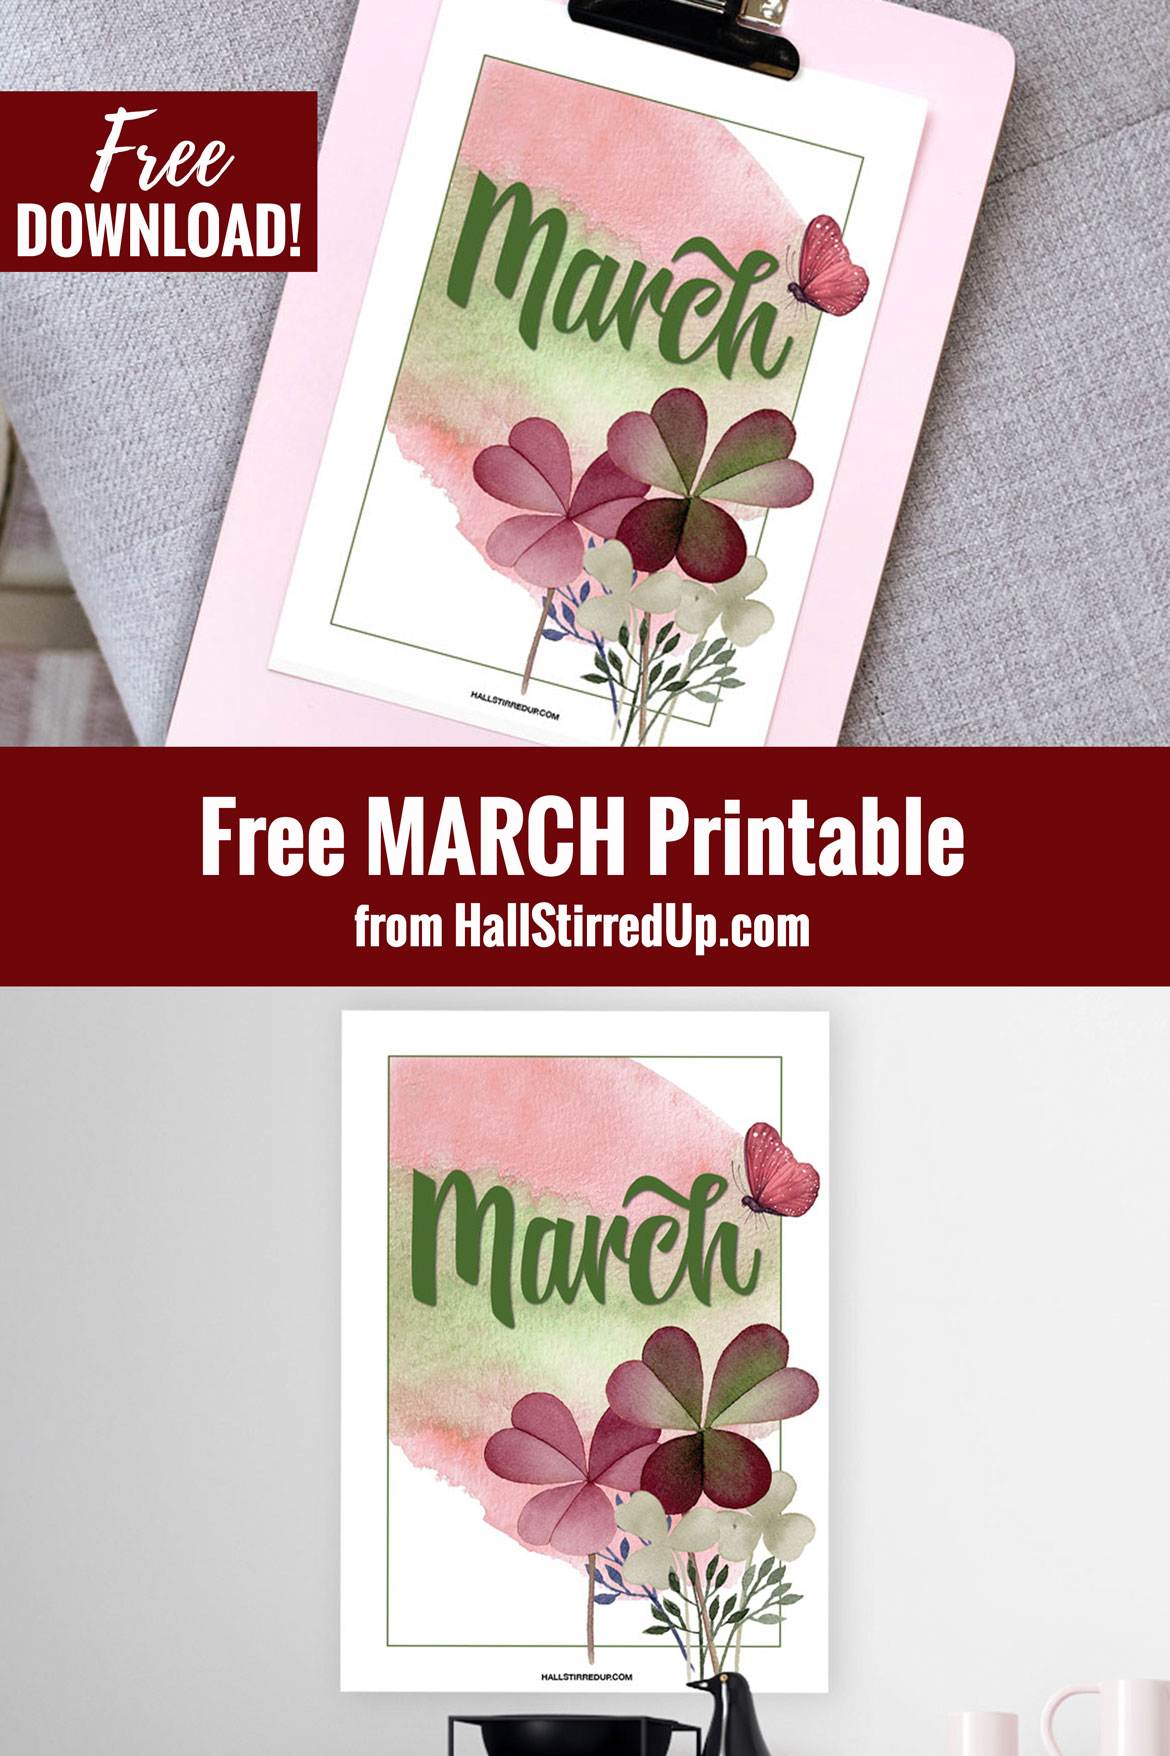 Let's celebrate the month of march with a pretty free printable